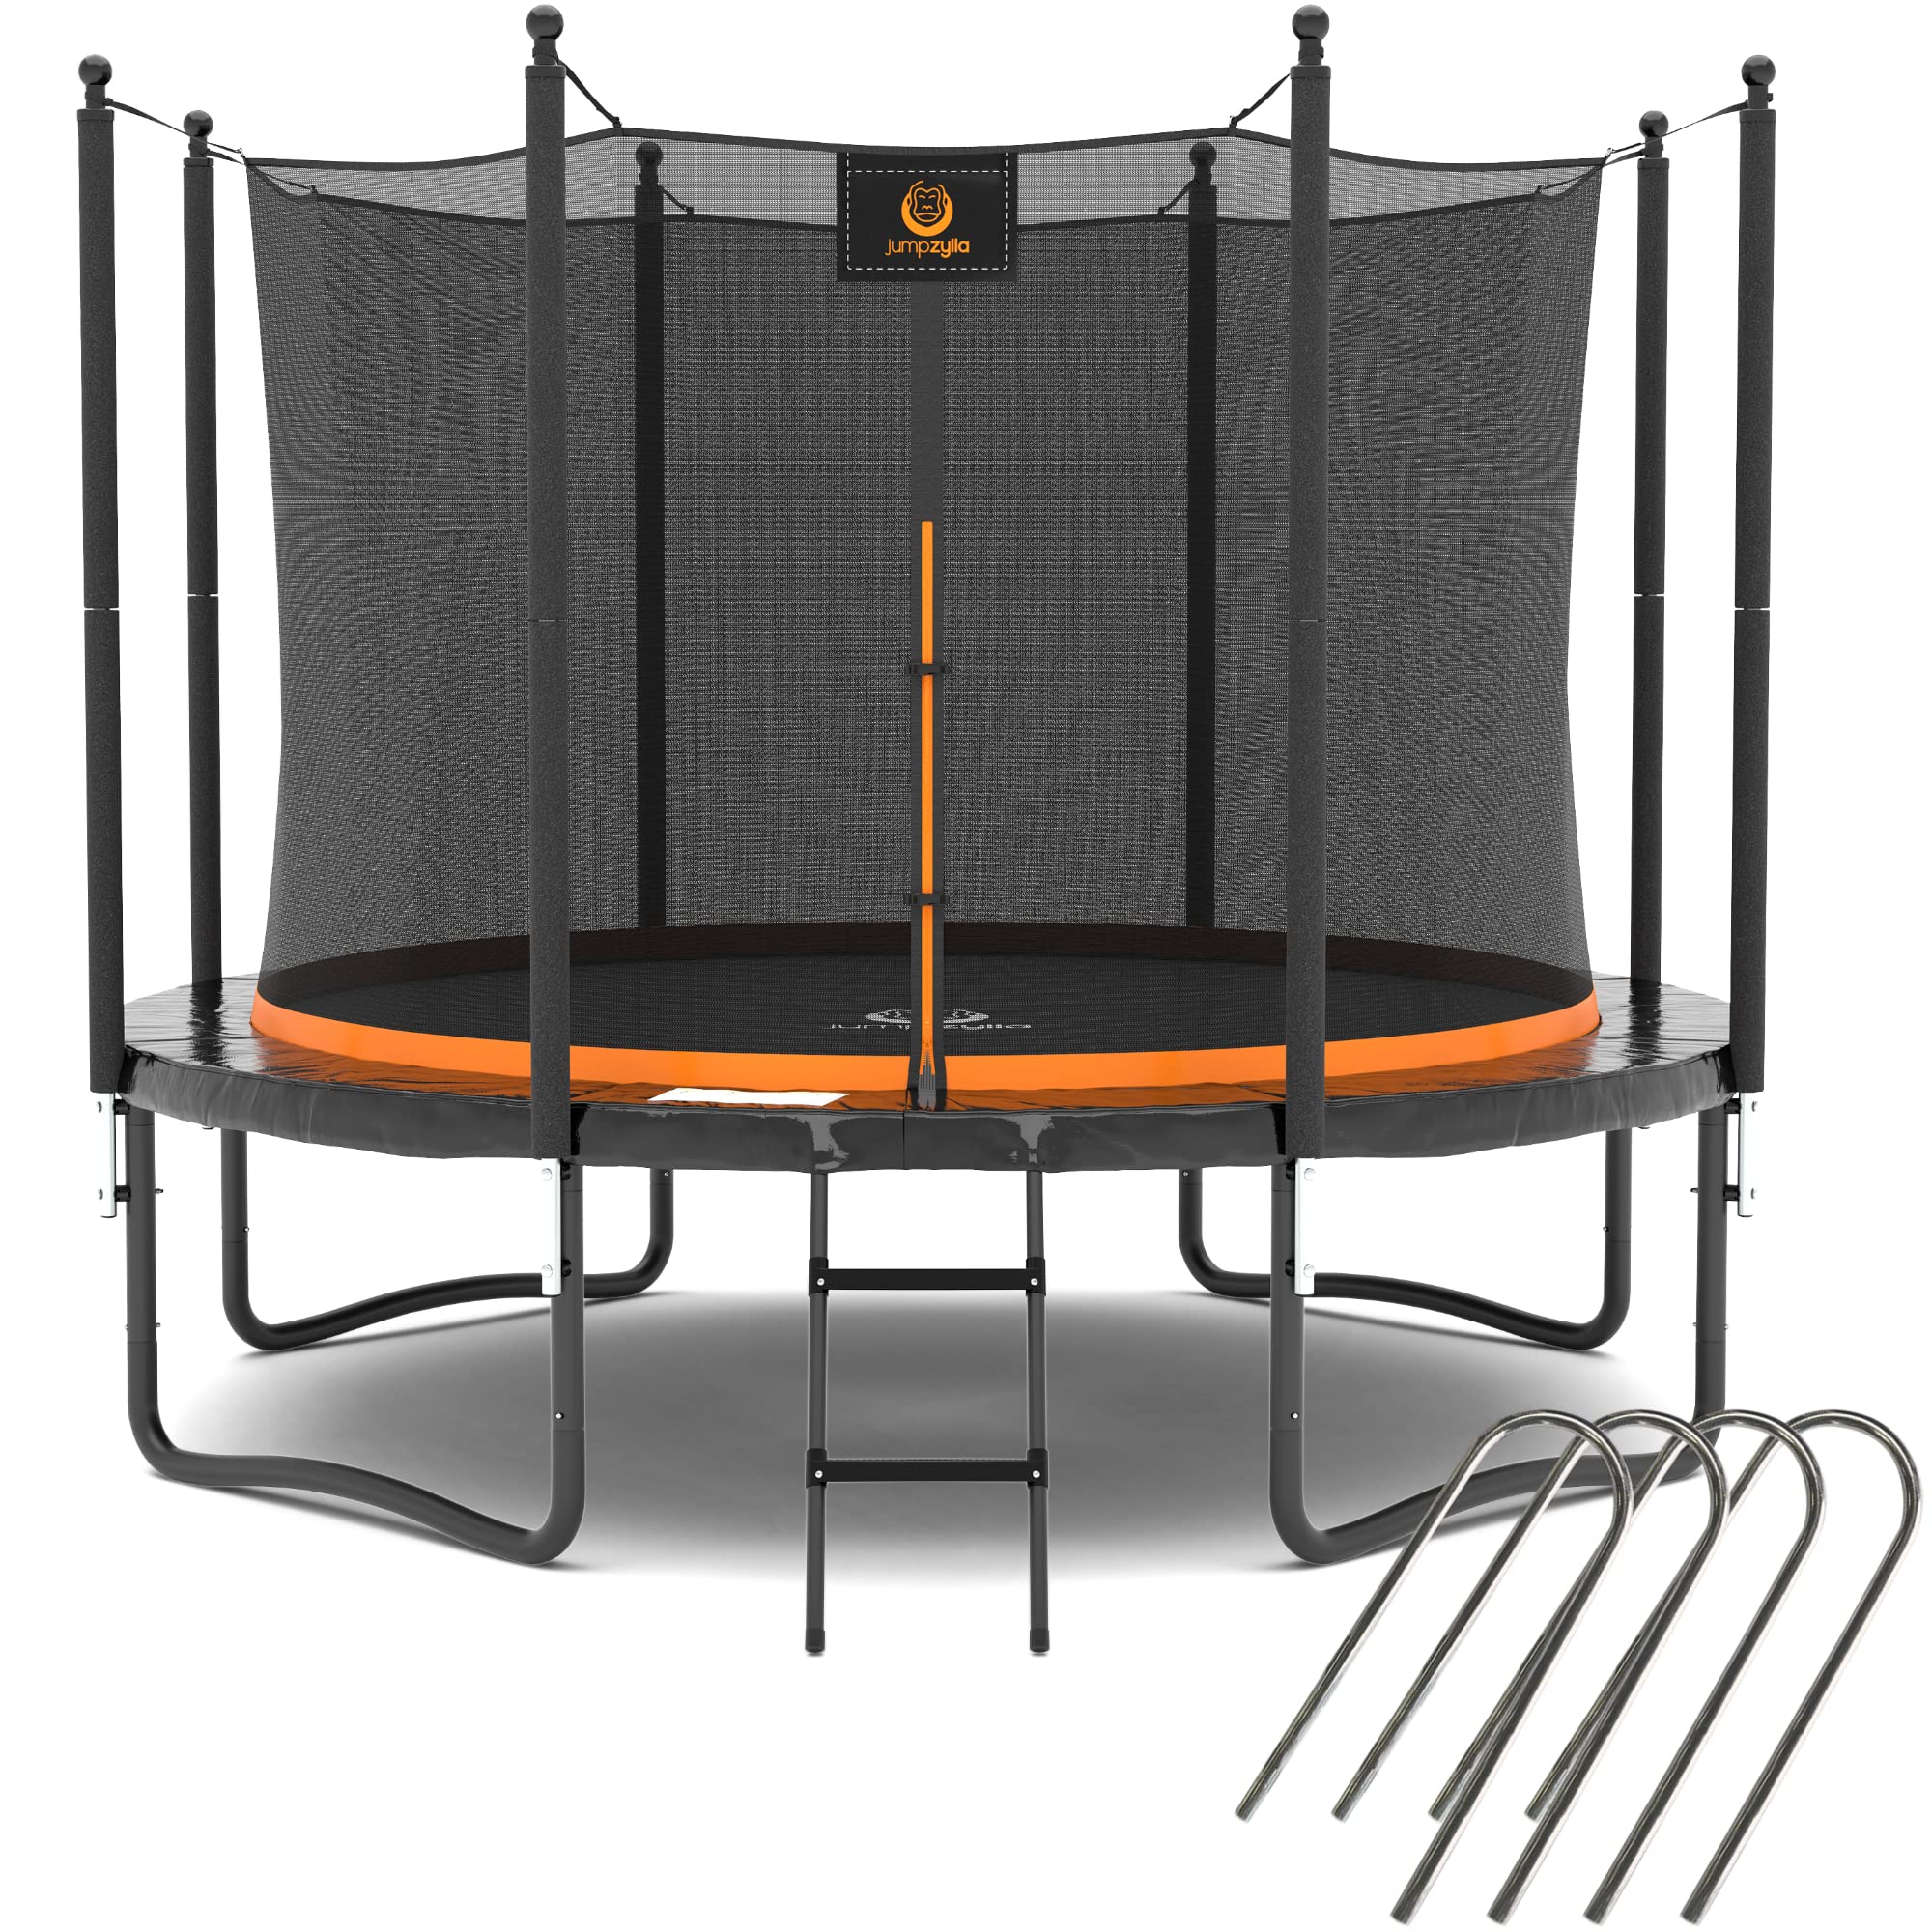 JUMPZYLLA New Trampoline for Kids and Adults 10 FT, 12 FT, 14 FT - Recreational Outdoor Trampoline with Net - Straight Pole Fun 